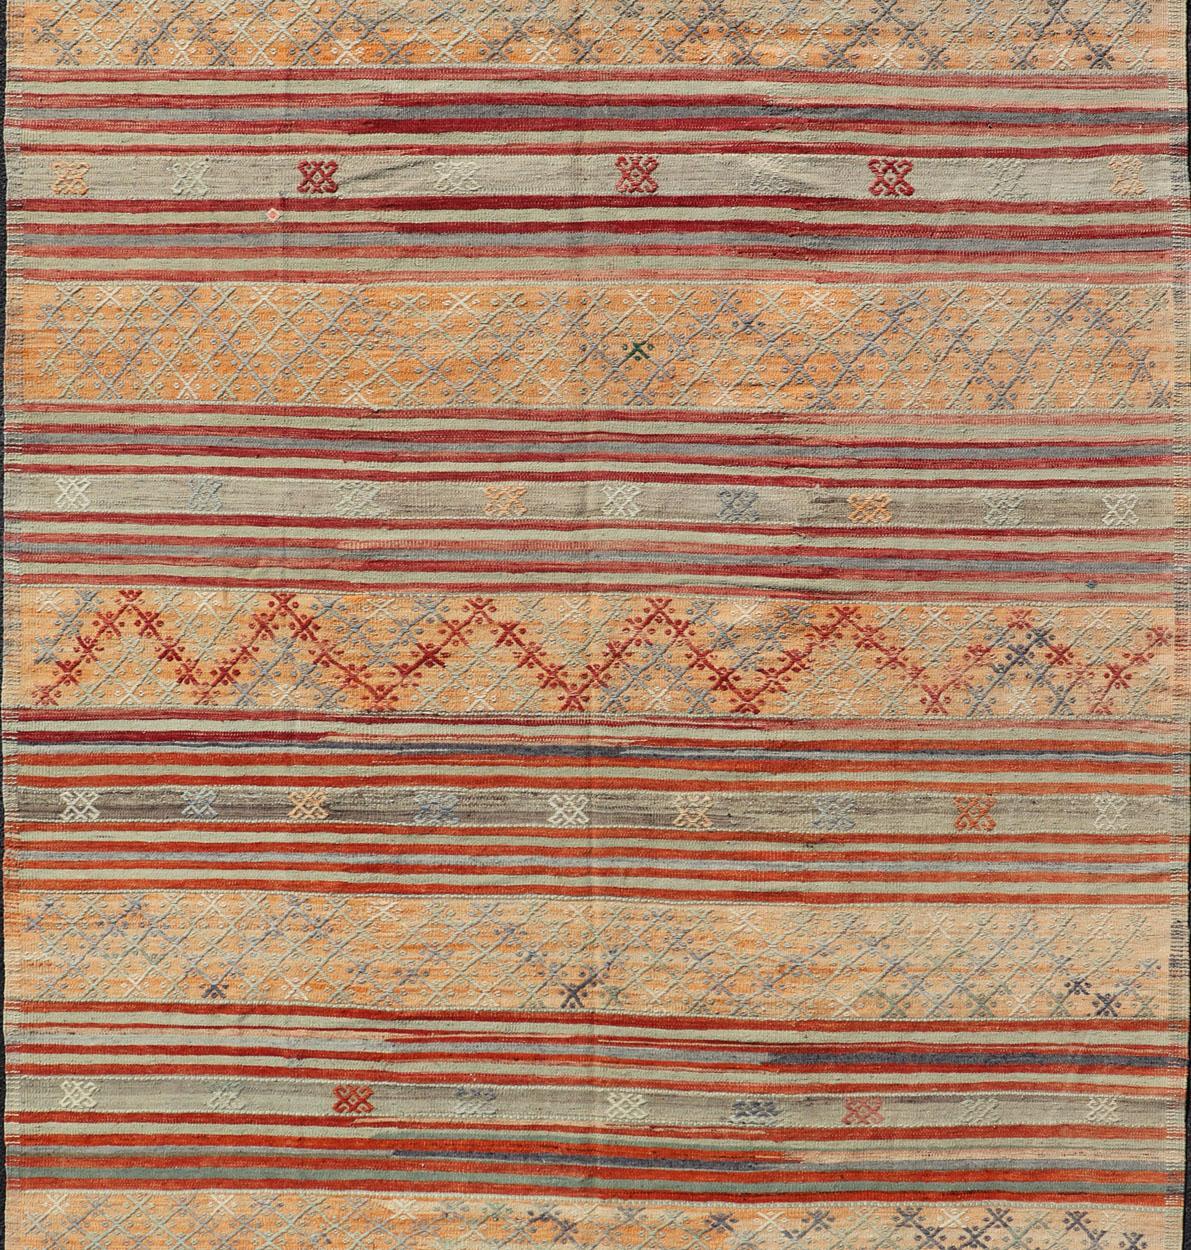 Hand-Woven Colorful Vintage Turkish Embroidered Kilim with Stripes and Geometric Motifs  For Sale